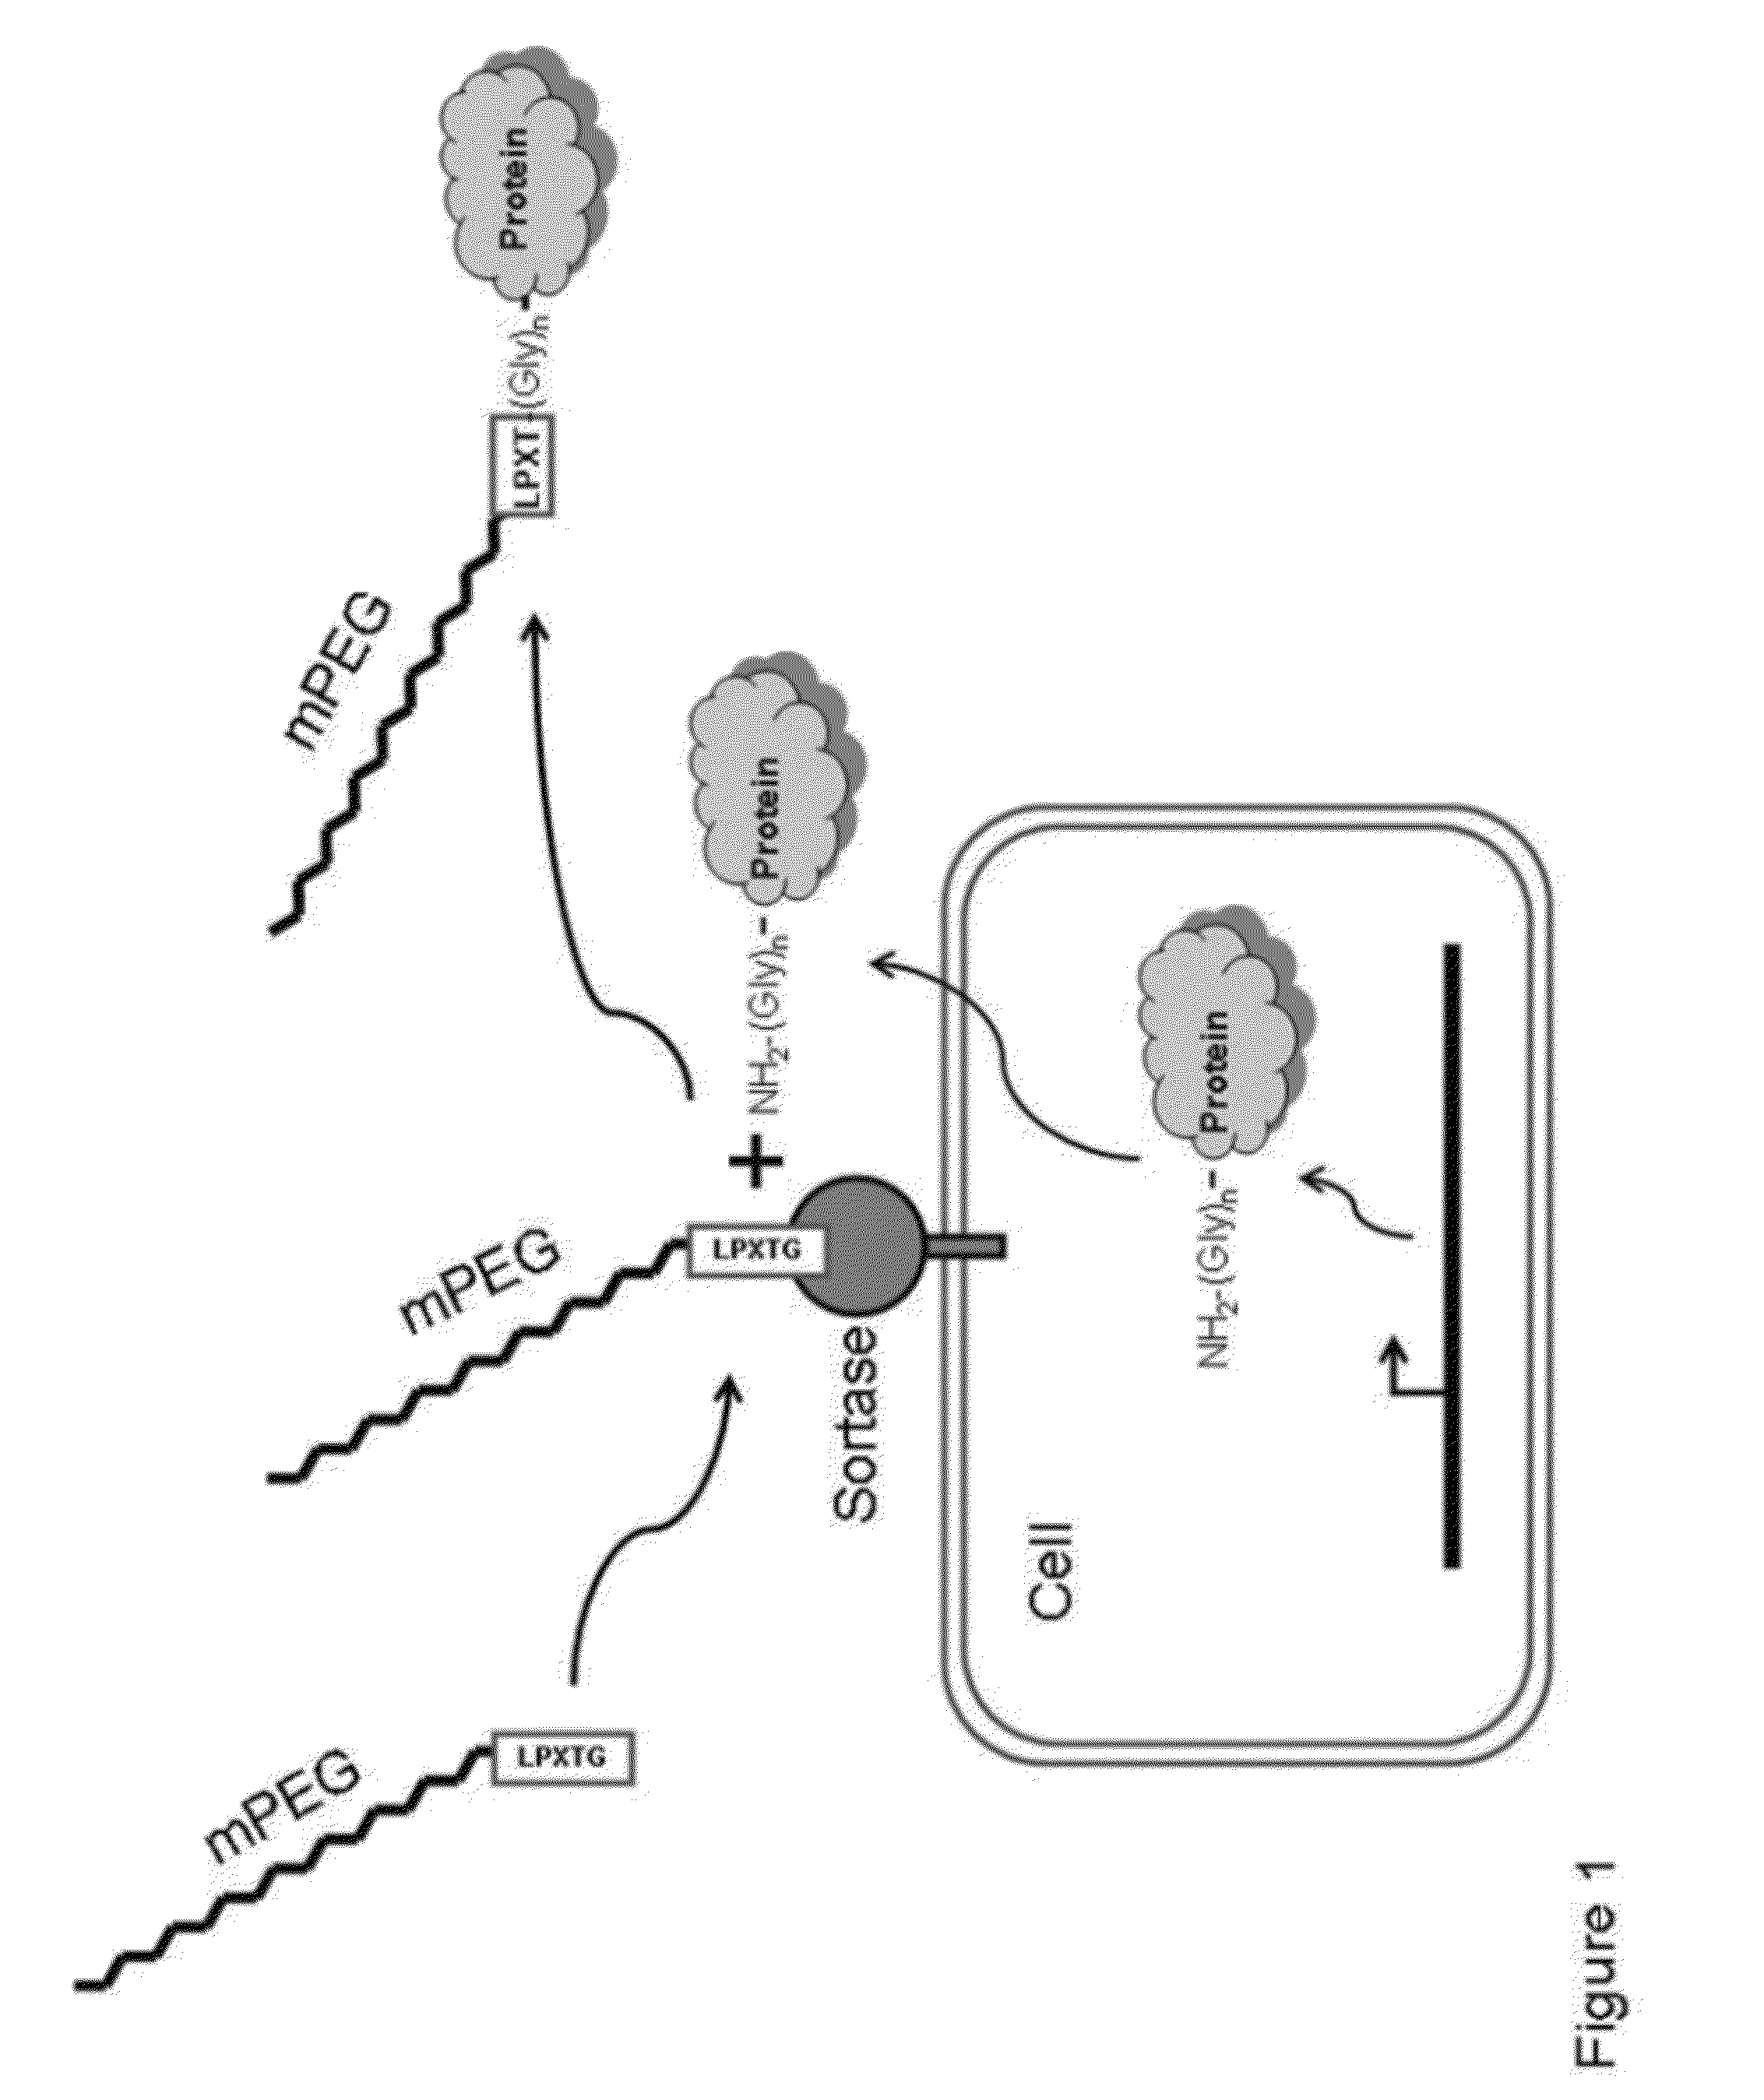 Compositions and methods for enhancing production of a biological product